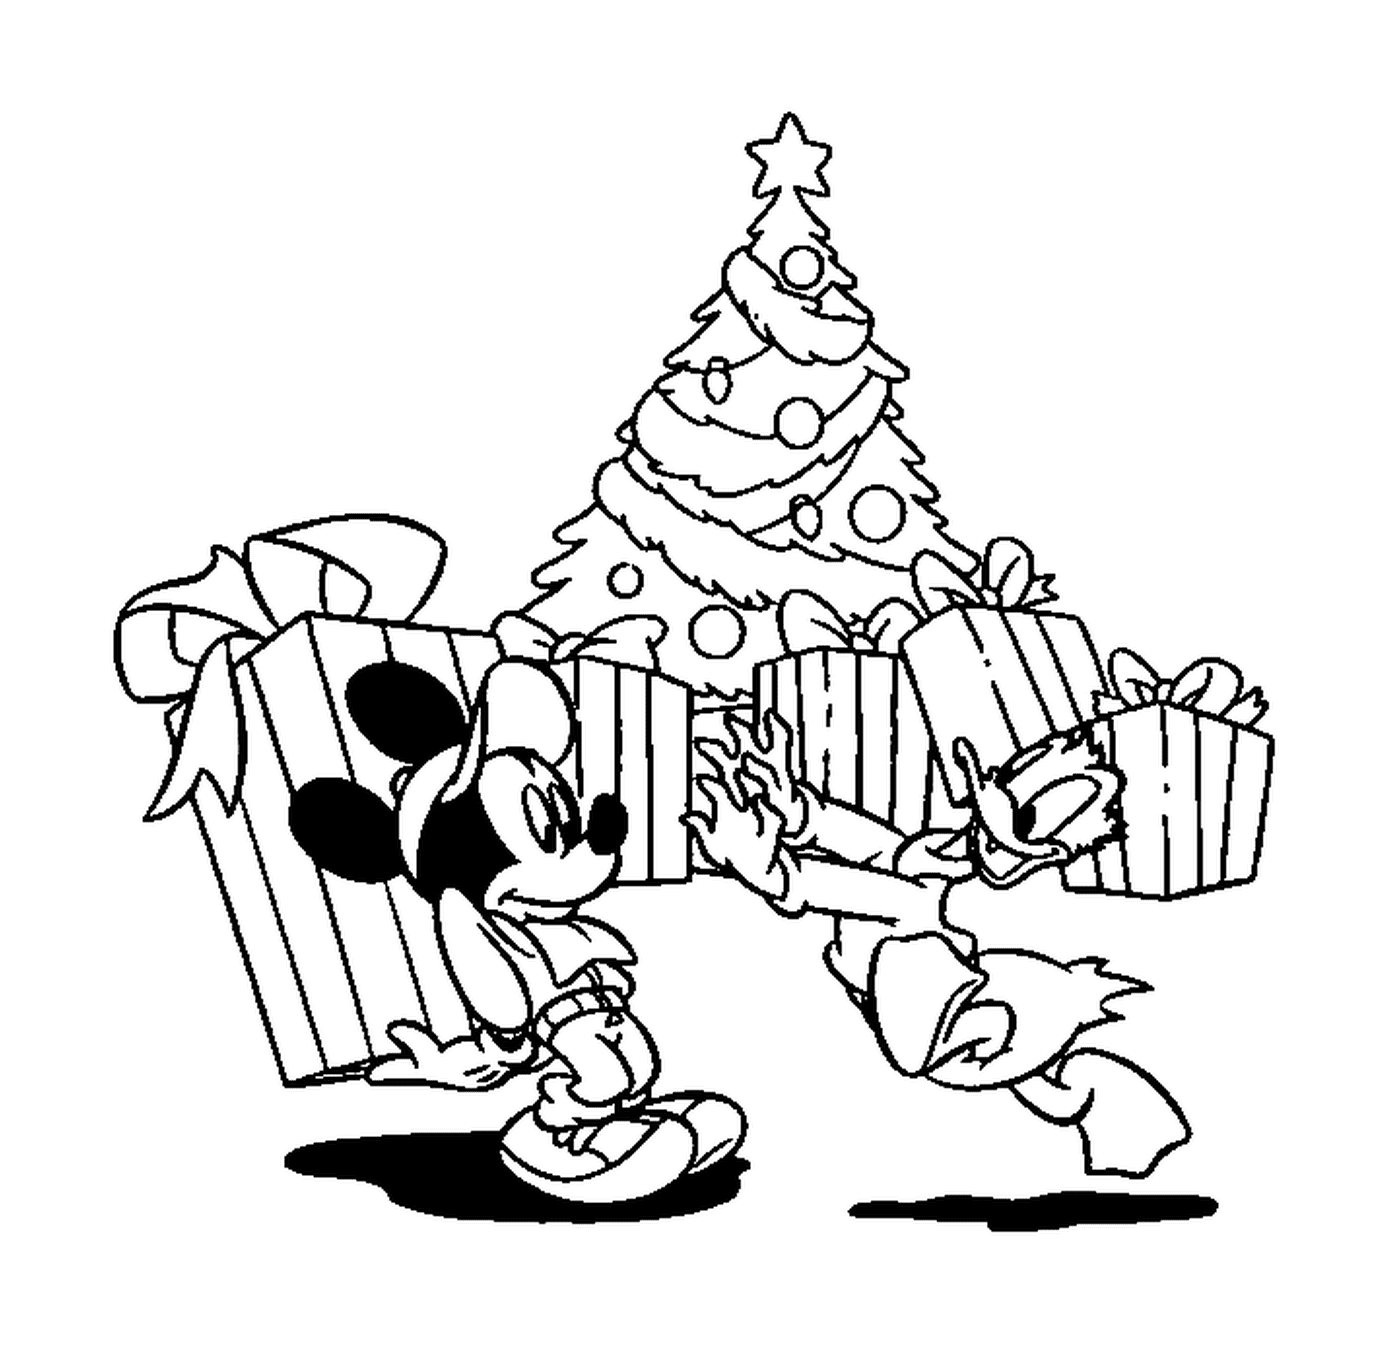  Donald and Mickey with Christmas tree presents 